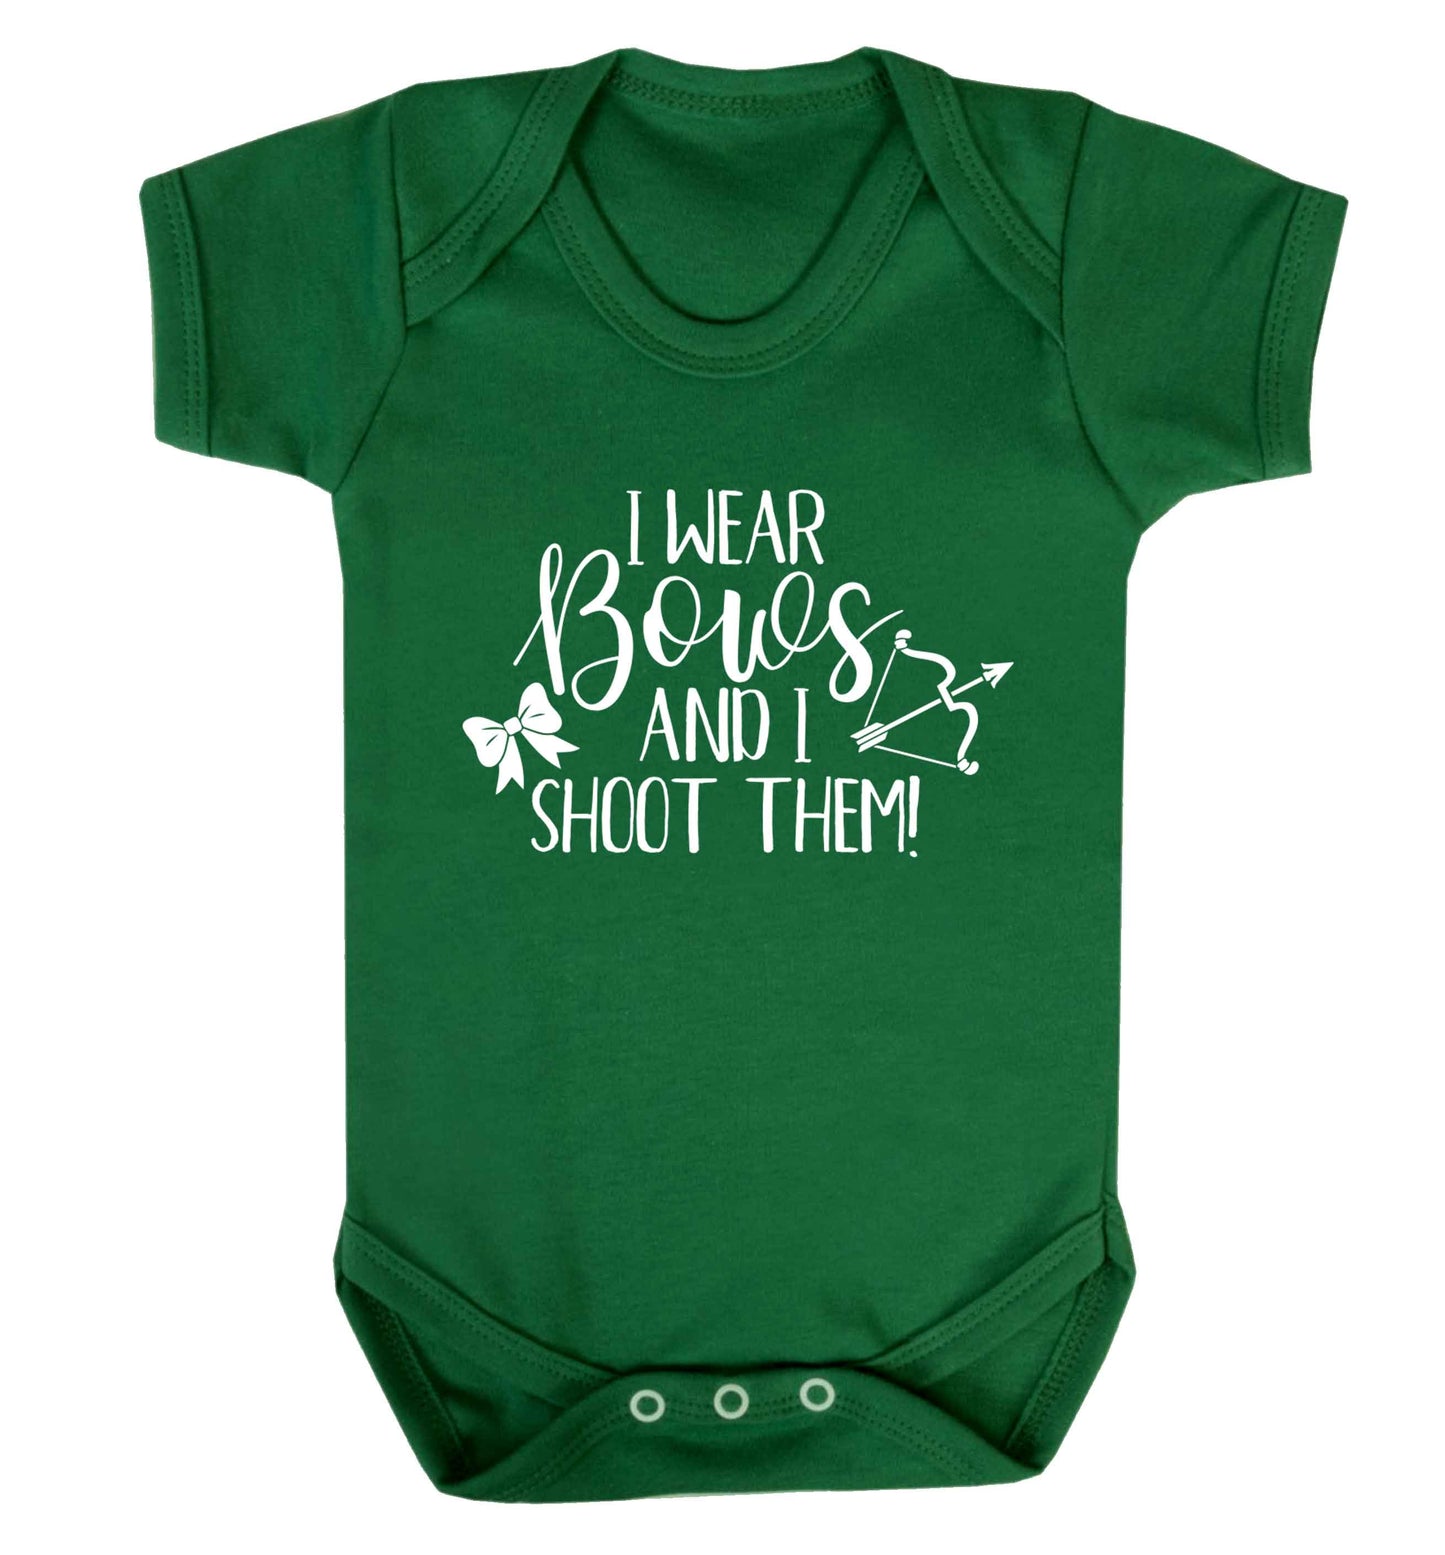 I wear bows and I shoot them Baby Vest green 18-24 months